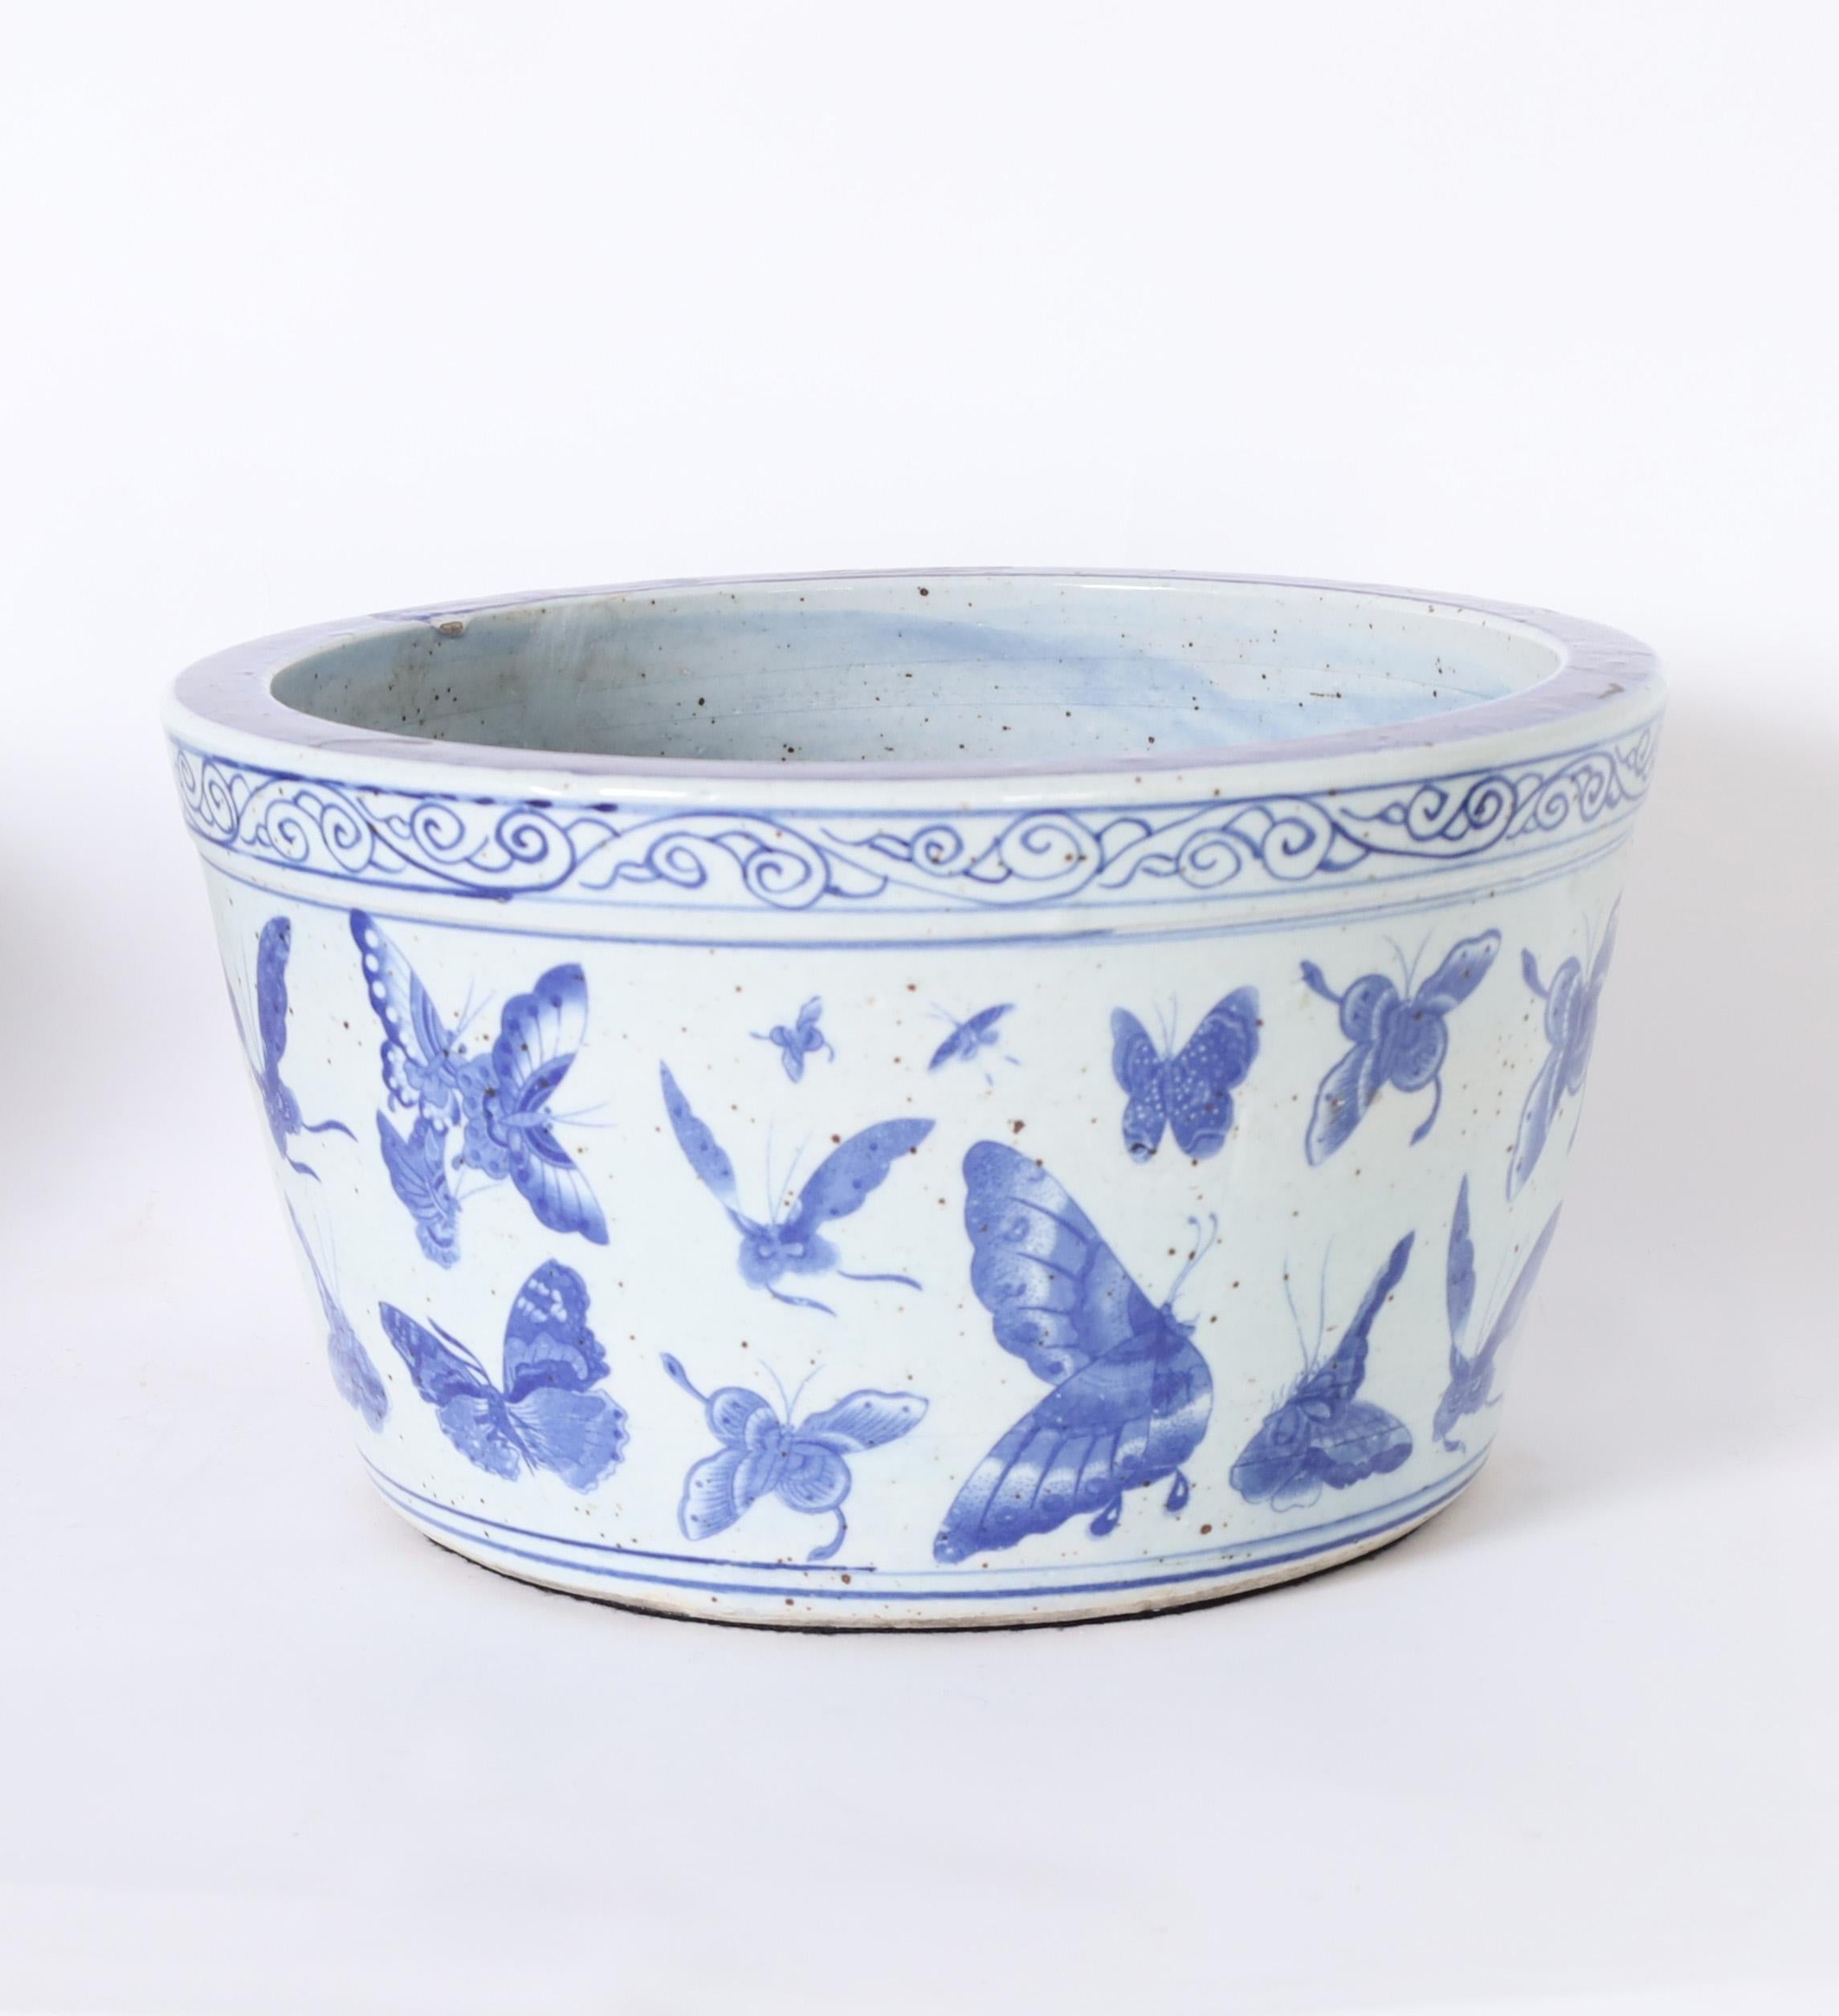 Glazed Pair of Chinese Blue and White Porcelain Bowls or Planters For Sale